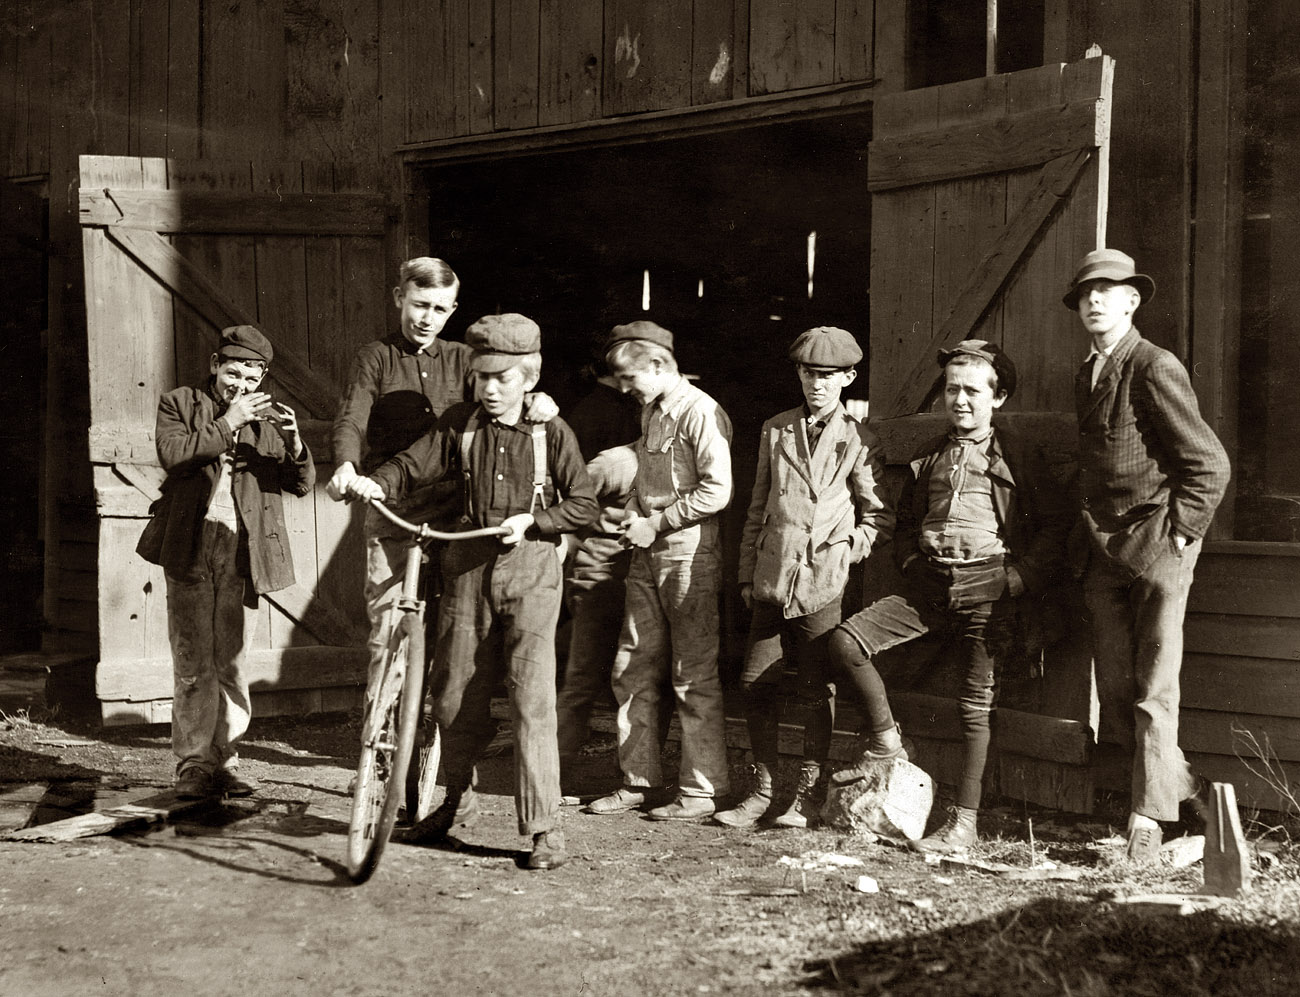 November 1909. Woodbury, New Jersey. "Woodbury Bottle Works. Noon hour. All are workers." View full size. Photograph by Lewis Wickes Hine.